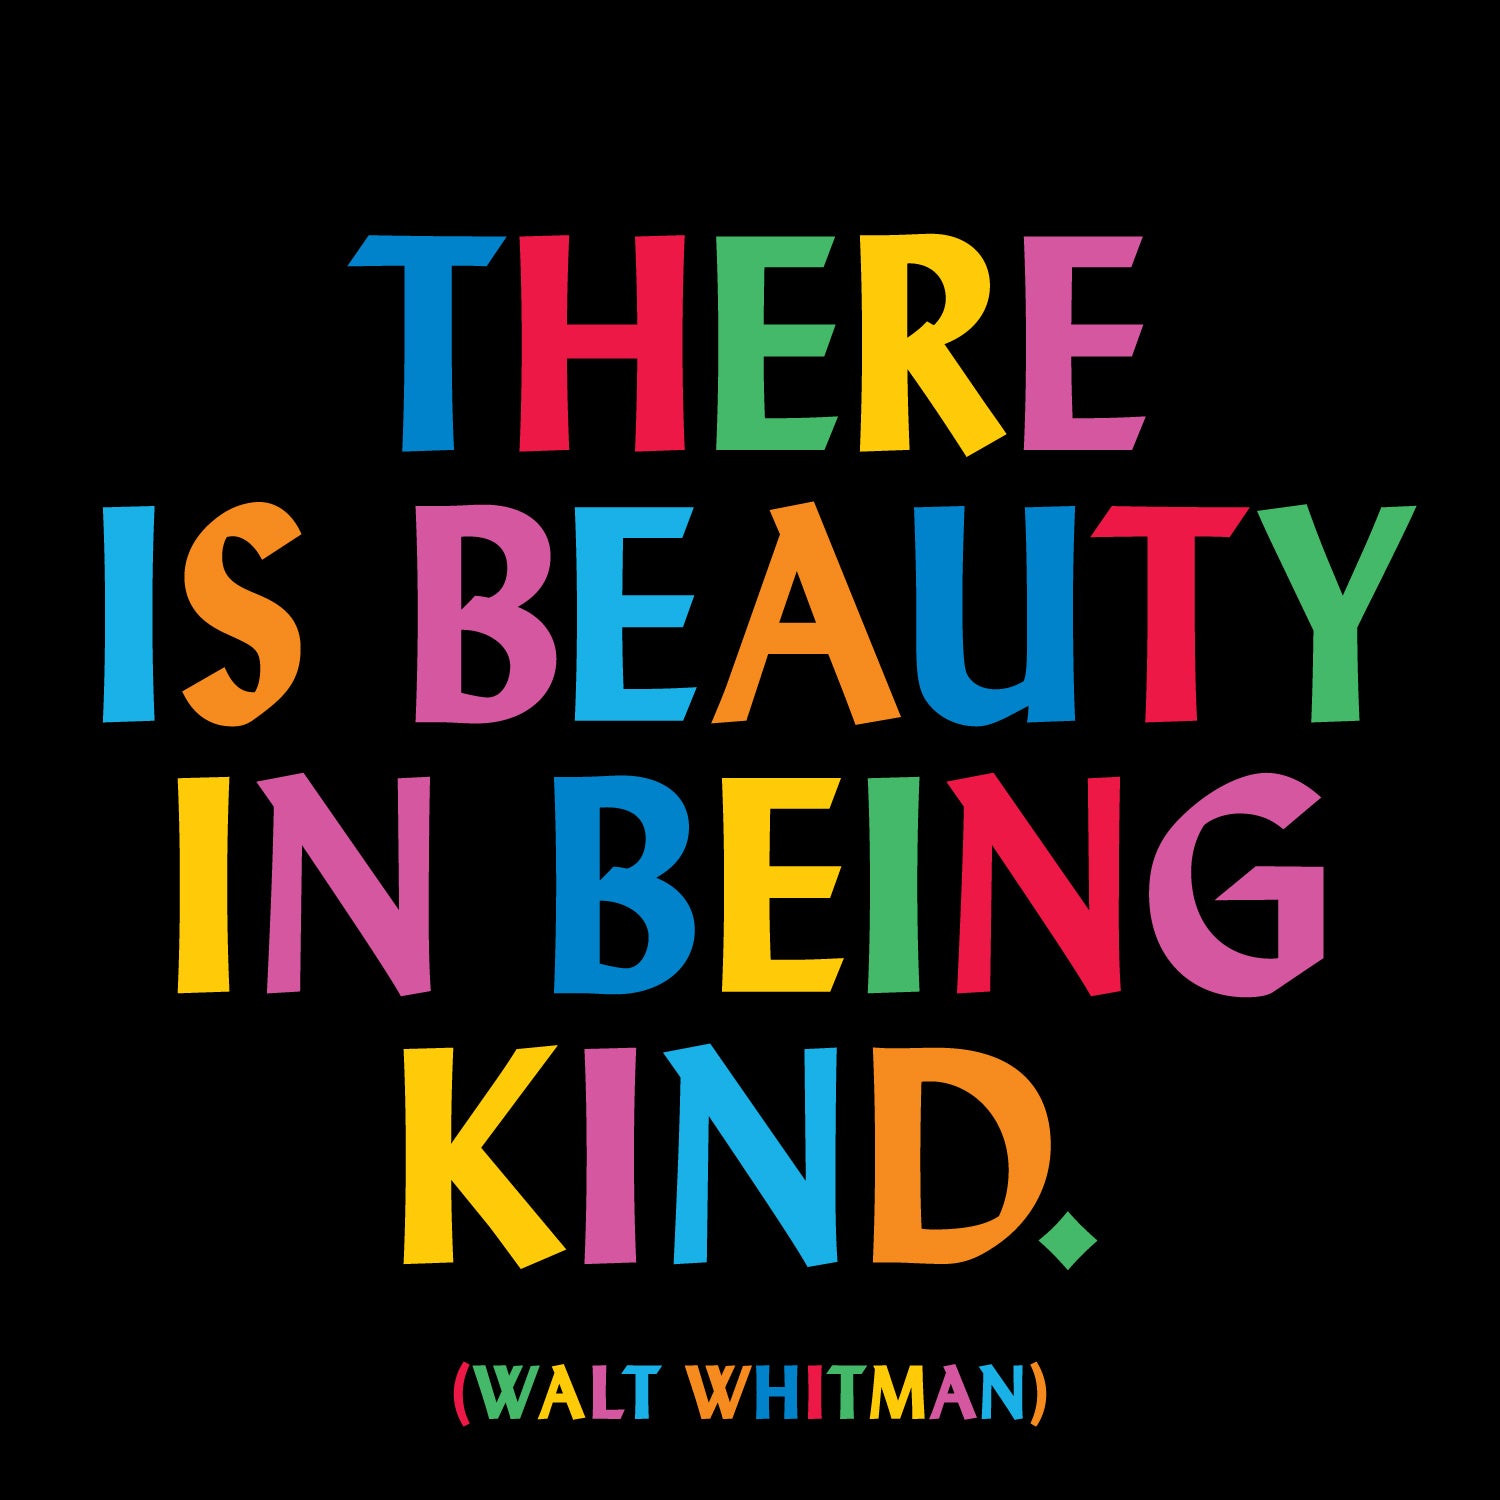 There is beauty in being kind